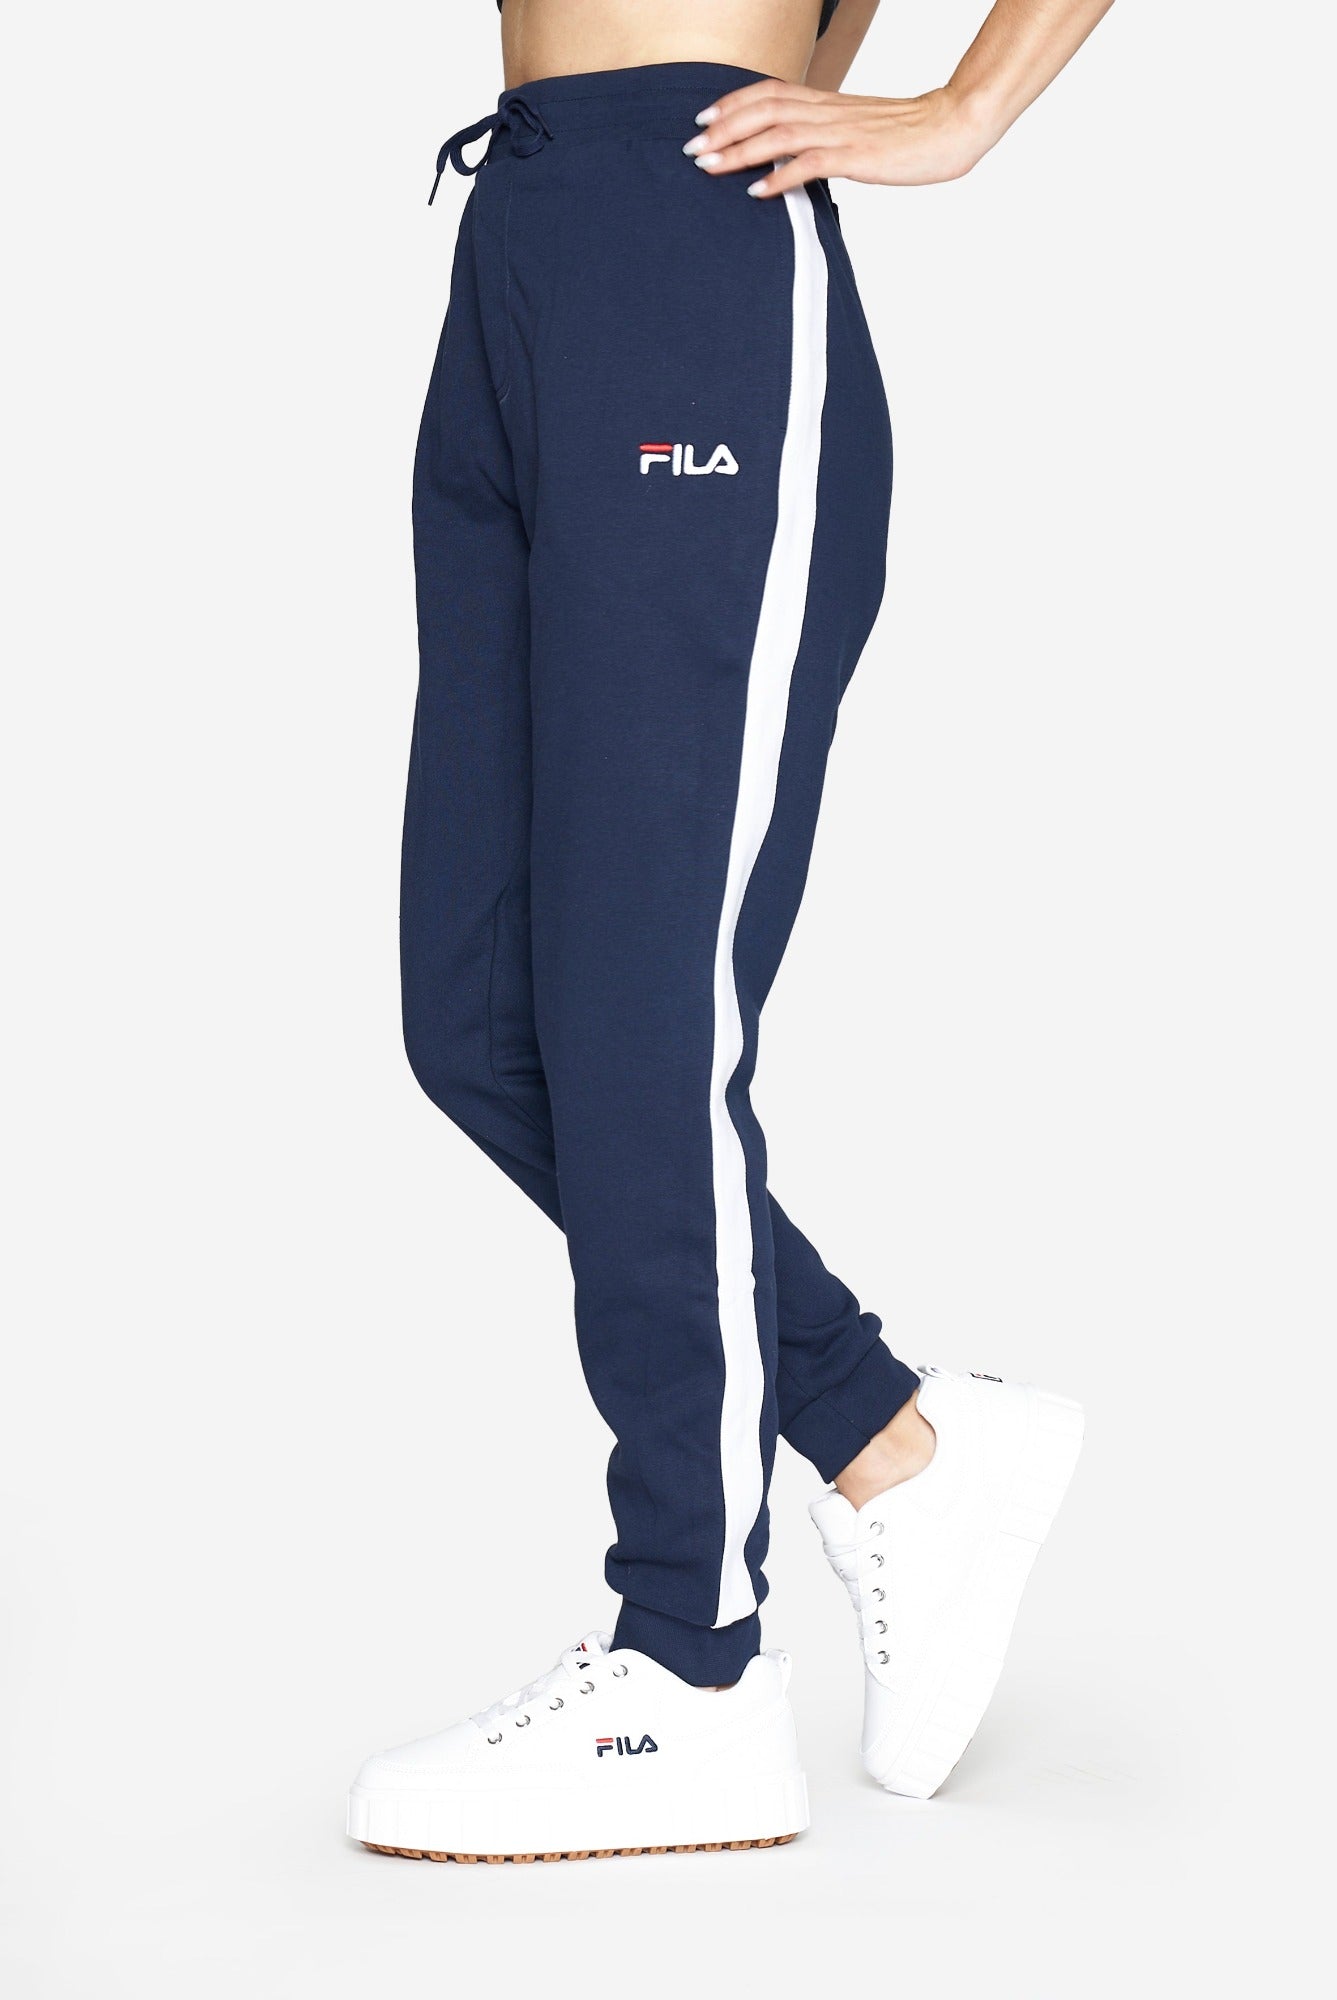 fila pants women's - OFF-66% >Free Delivery